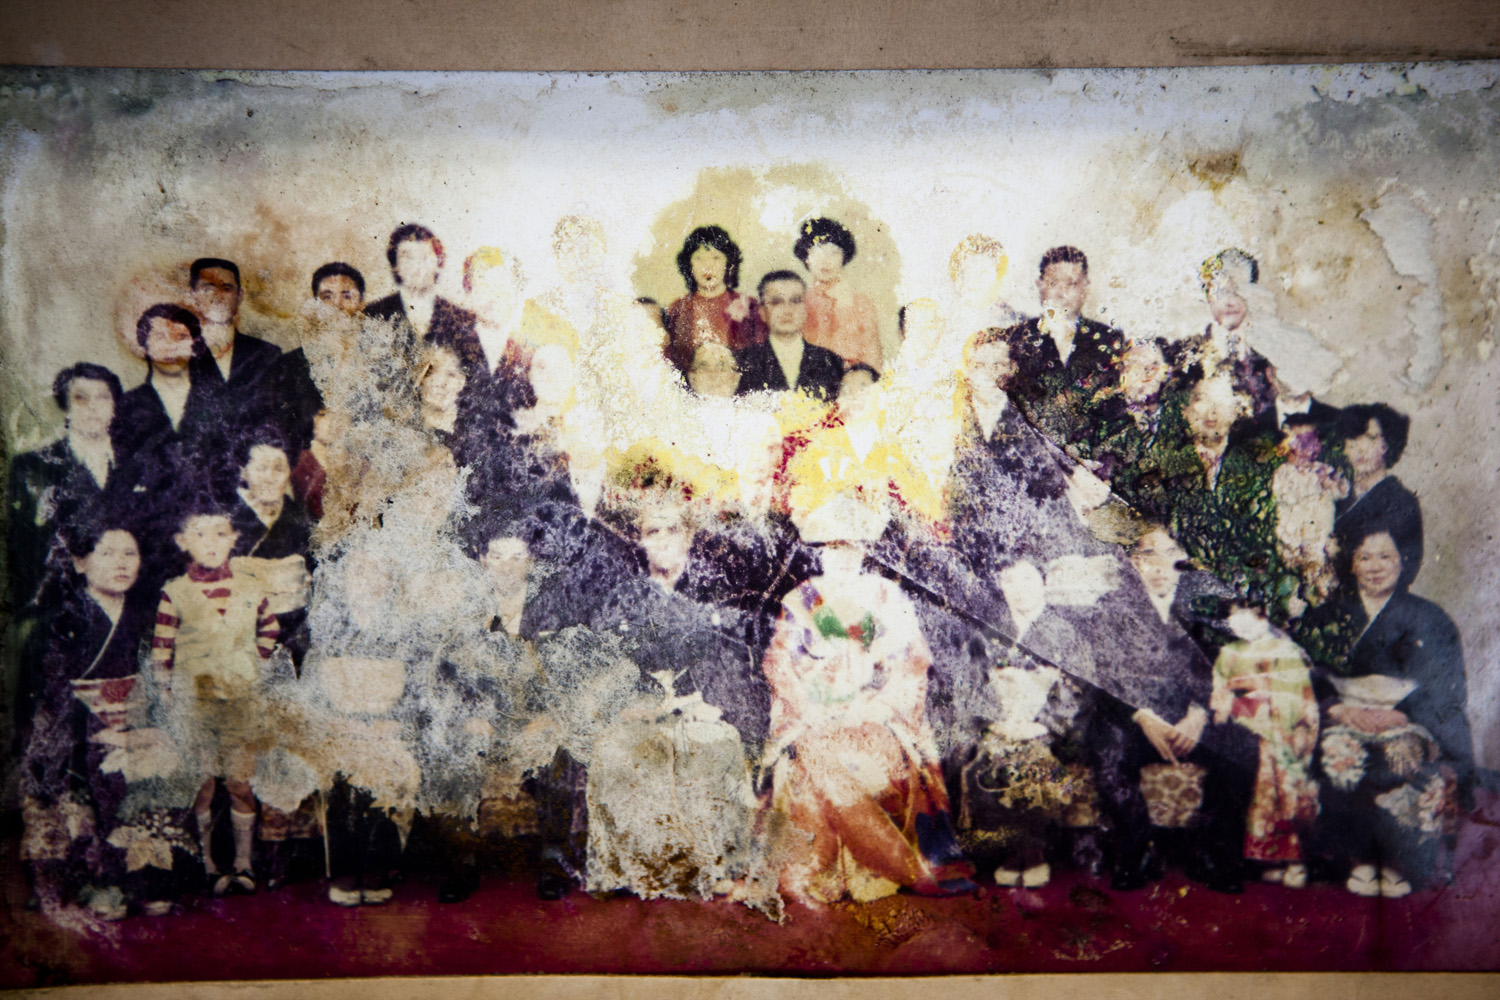 Japan, Minamisoma, 2012.
                              A photograph damaged by the tsunami is preserved in a gallery for family members to find again near the city center in Minamisoma.